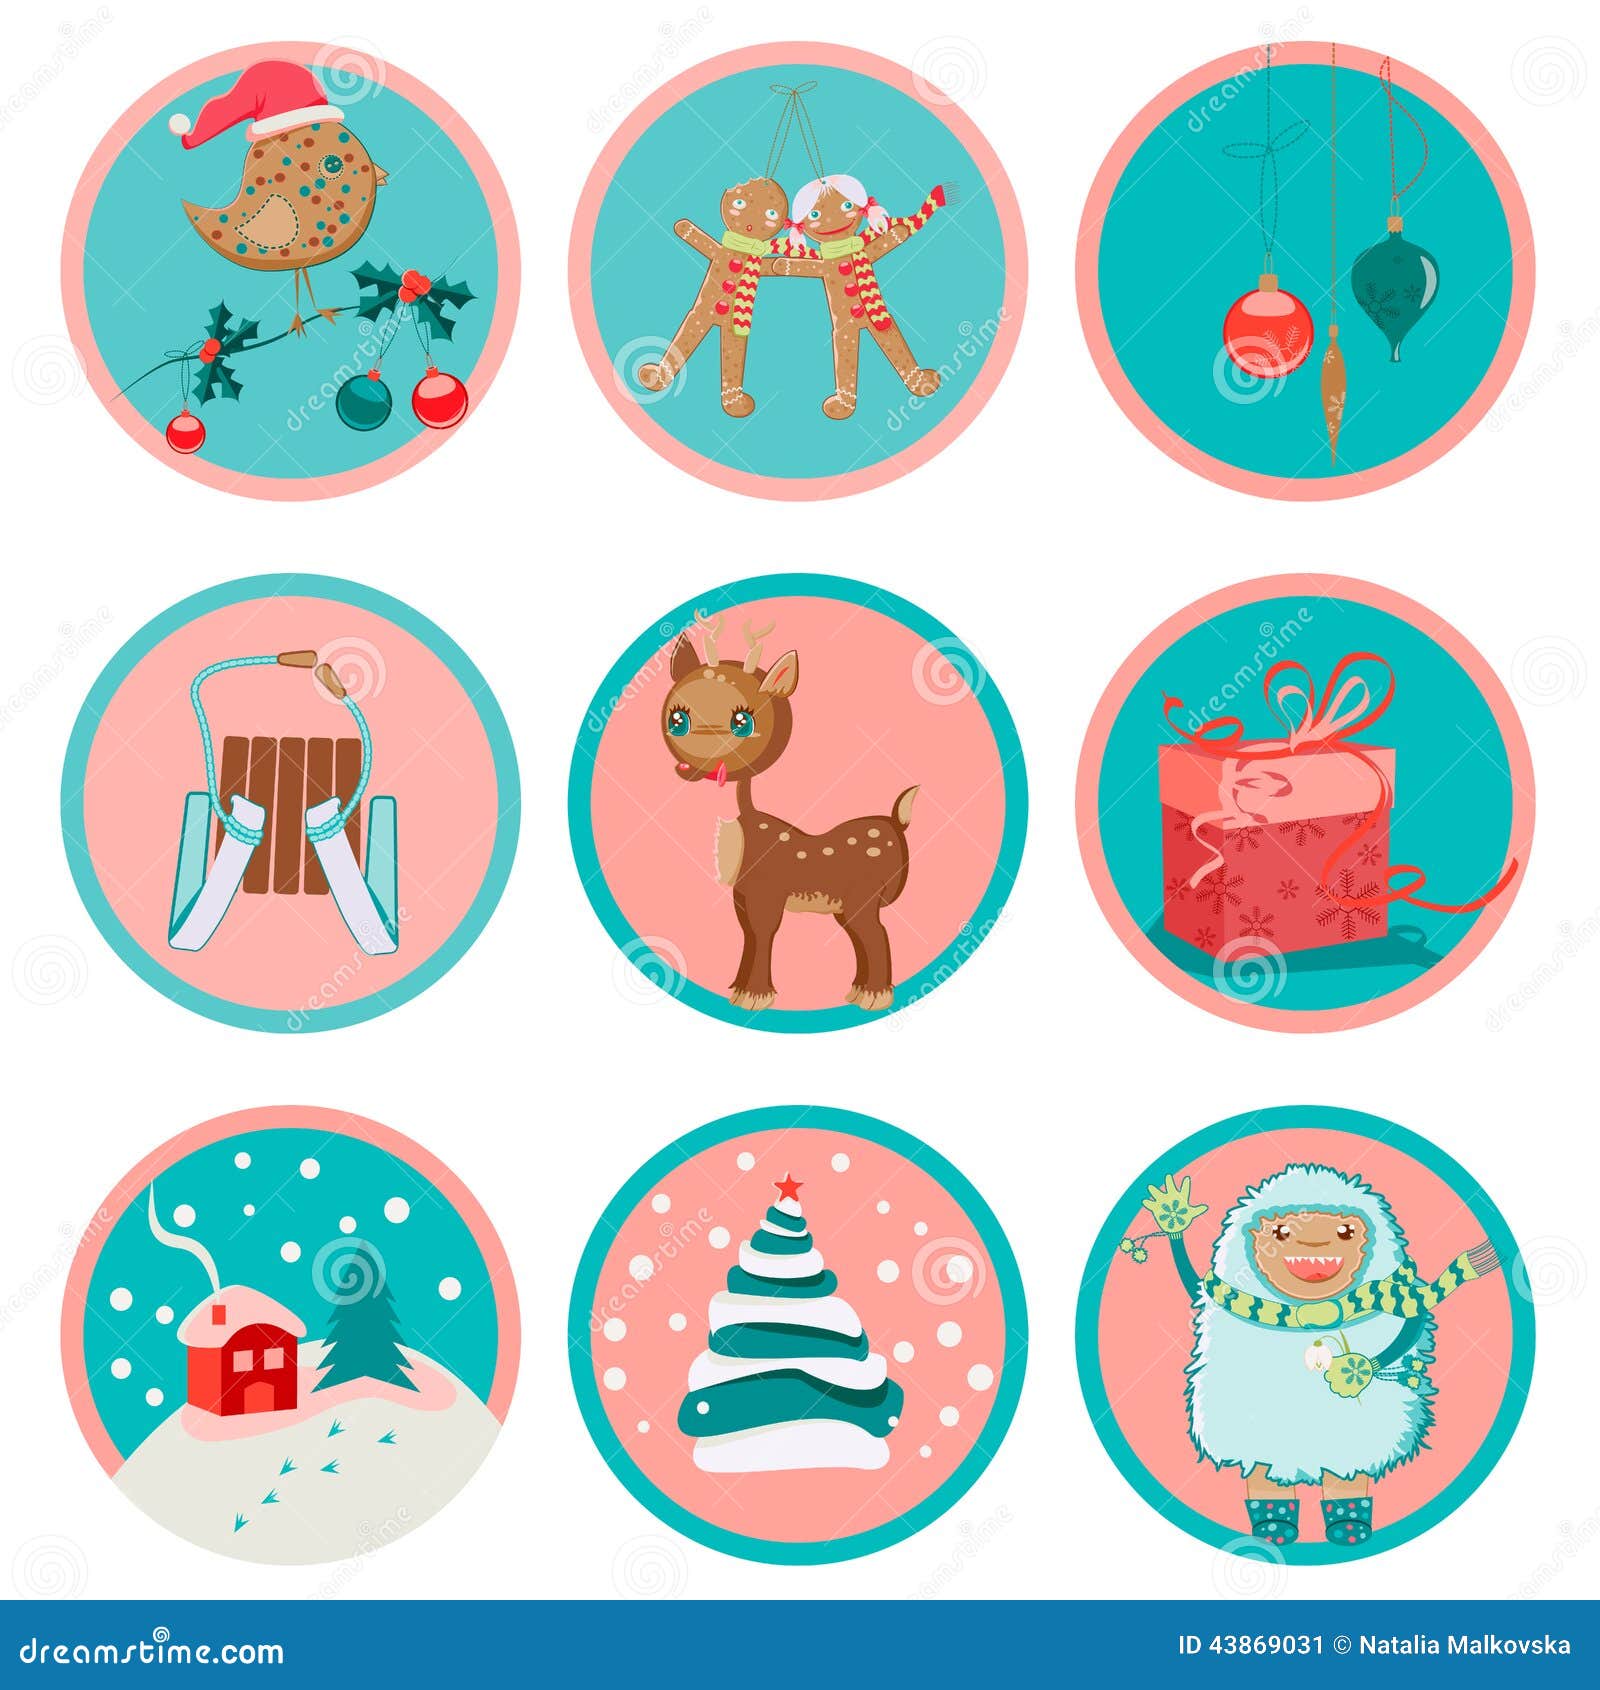 Cute Christmas Icons Stock Vector - Image: 43869031